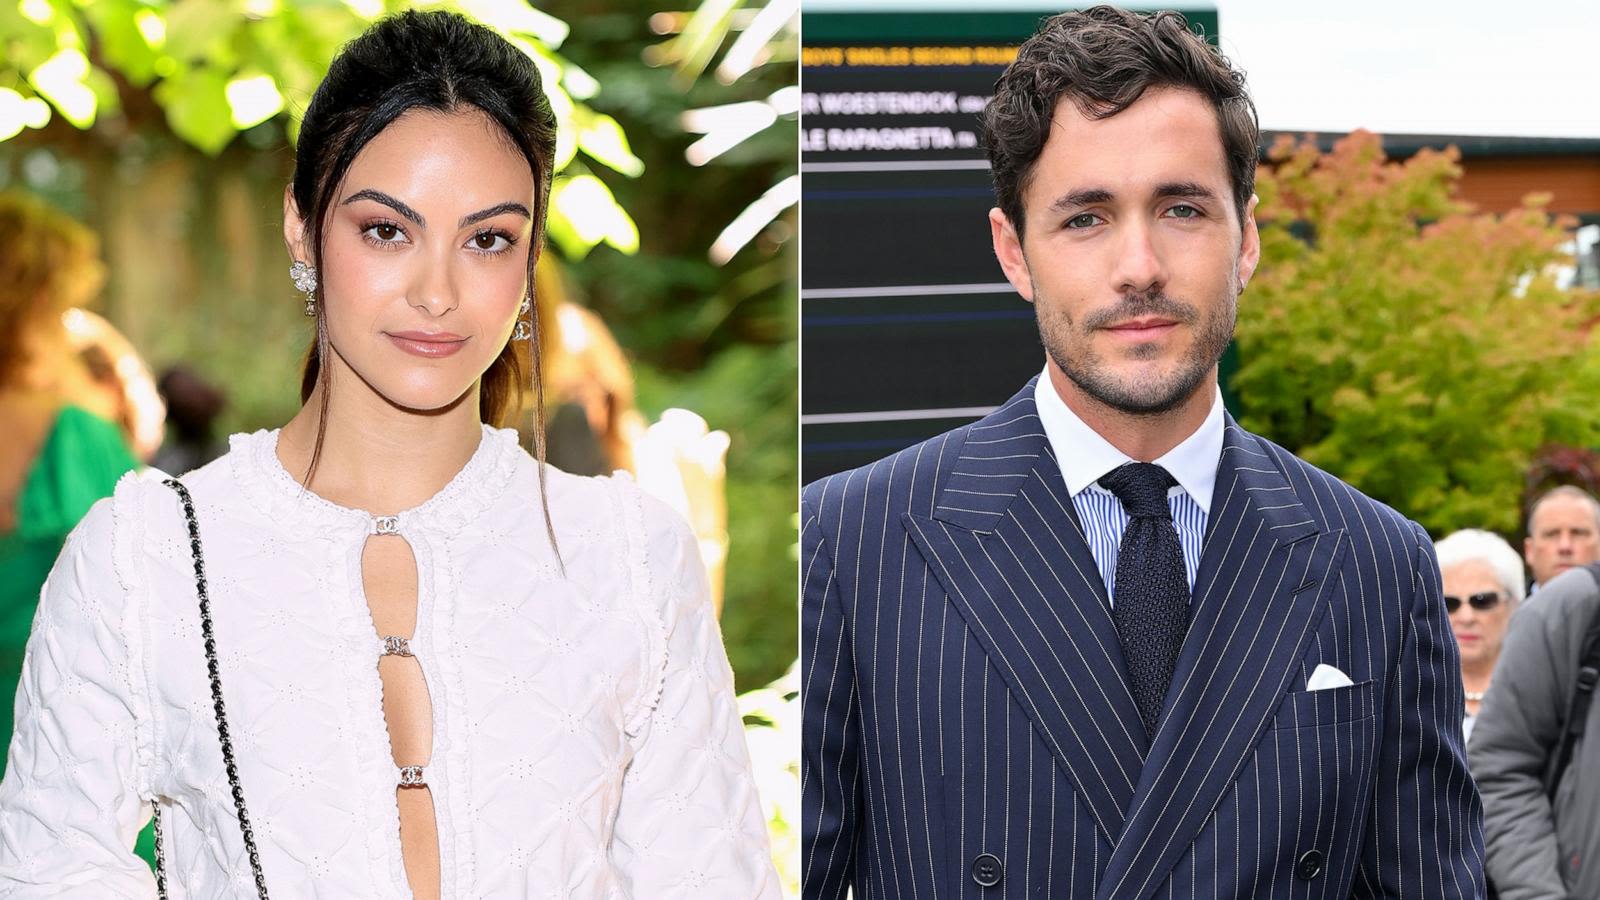 Camila Mendes and more in talks for new 'I Know What You Did Last Summer' film